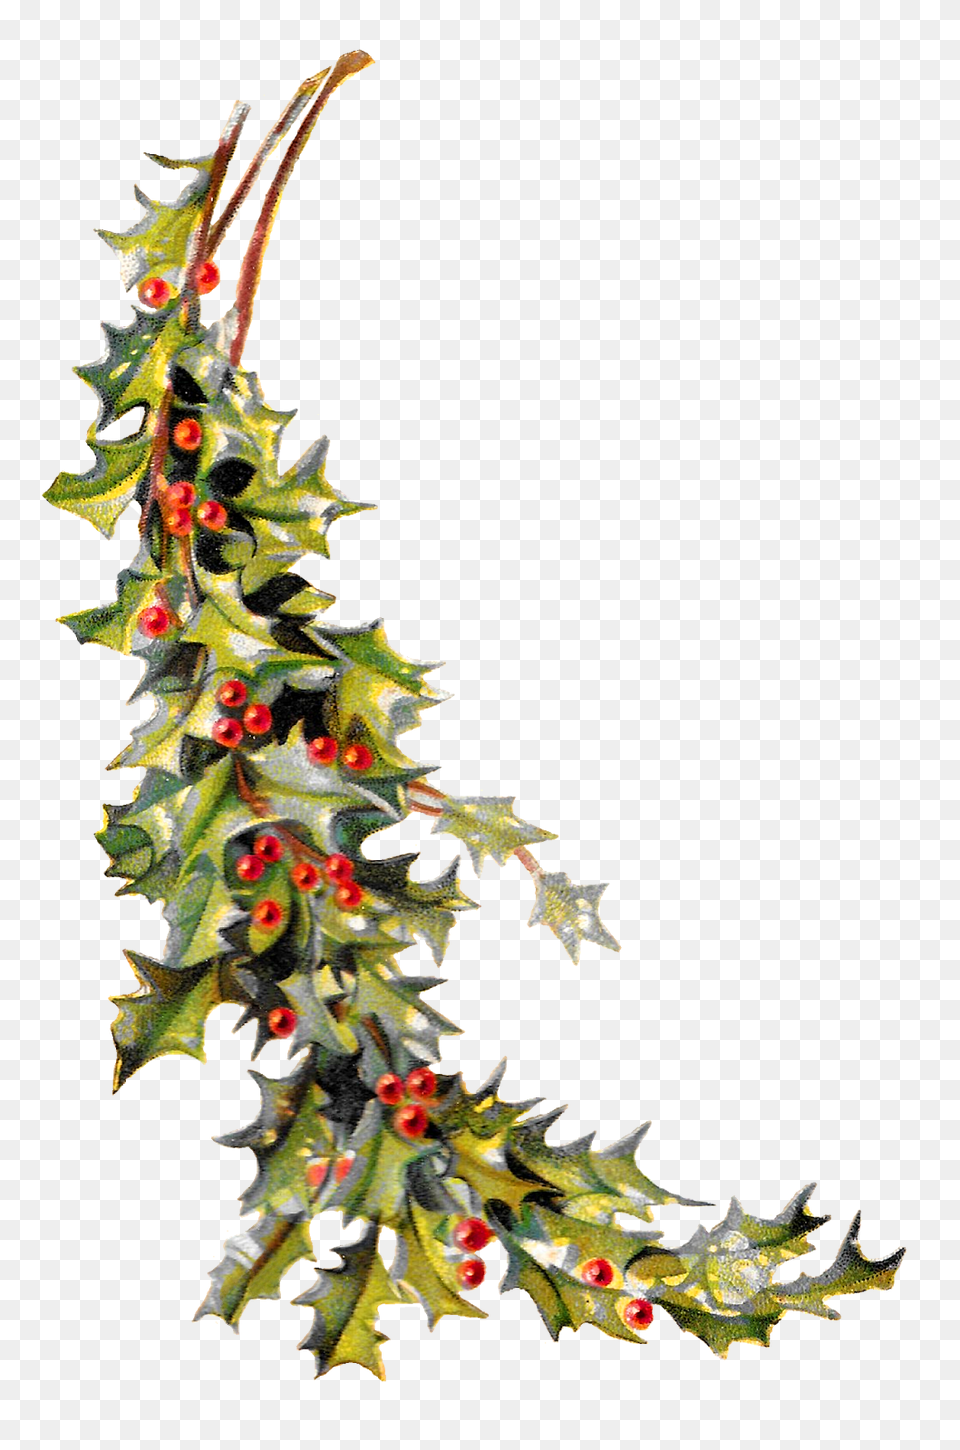 Antique Images Free Christmas Holly Holiday Clip Art, Plant, Christmas Decorations, Festival, Tree Png Image